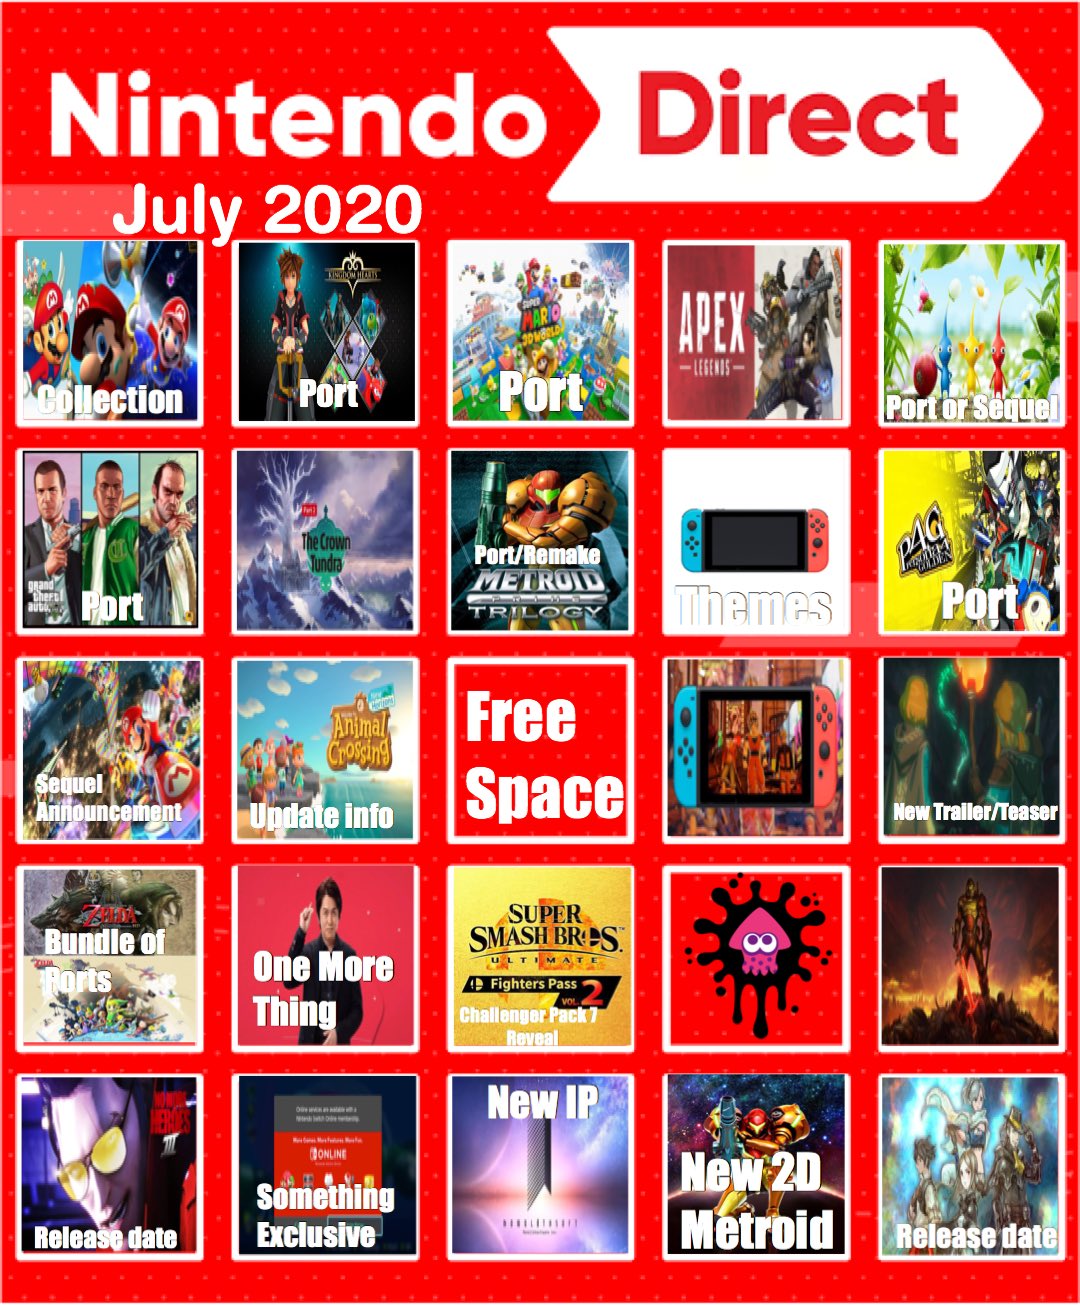 Jacob  @ Kirby's Return To Dreamland Deluxe on "With there being rumours of a Nintendo Direct July. I made a Bingo Board for a possible July 2020 Nintendo Direct.